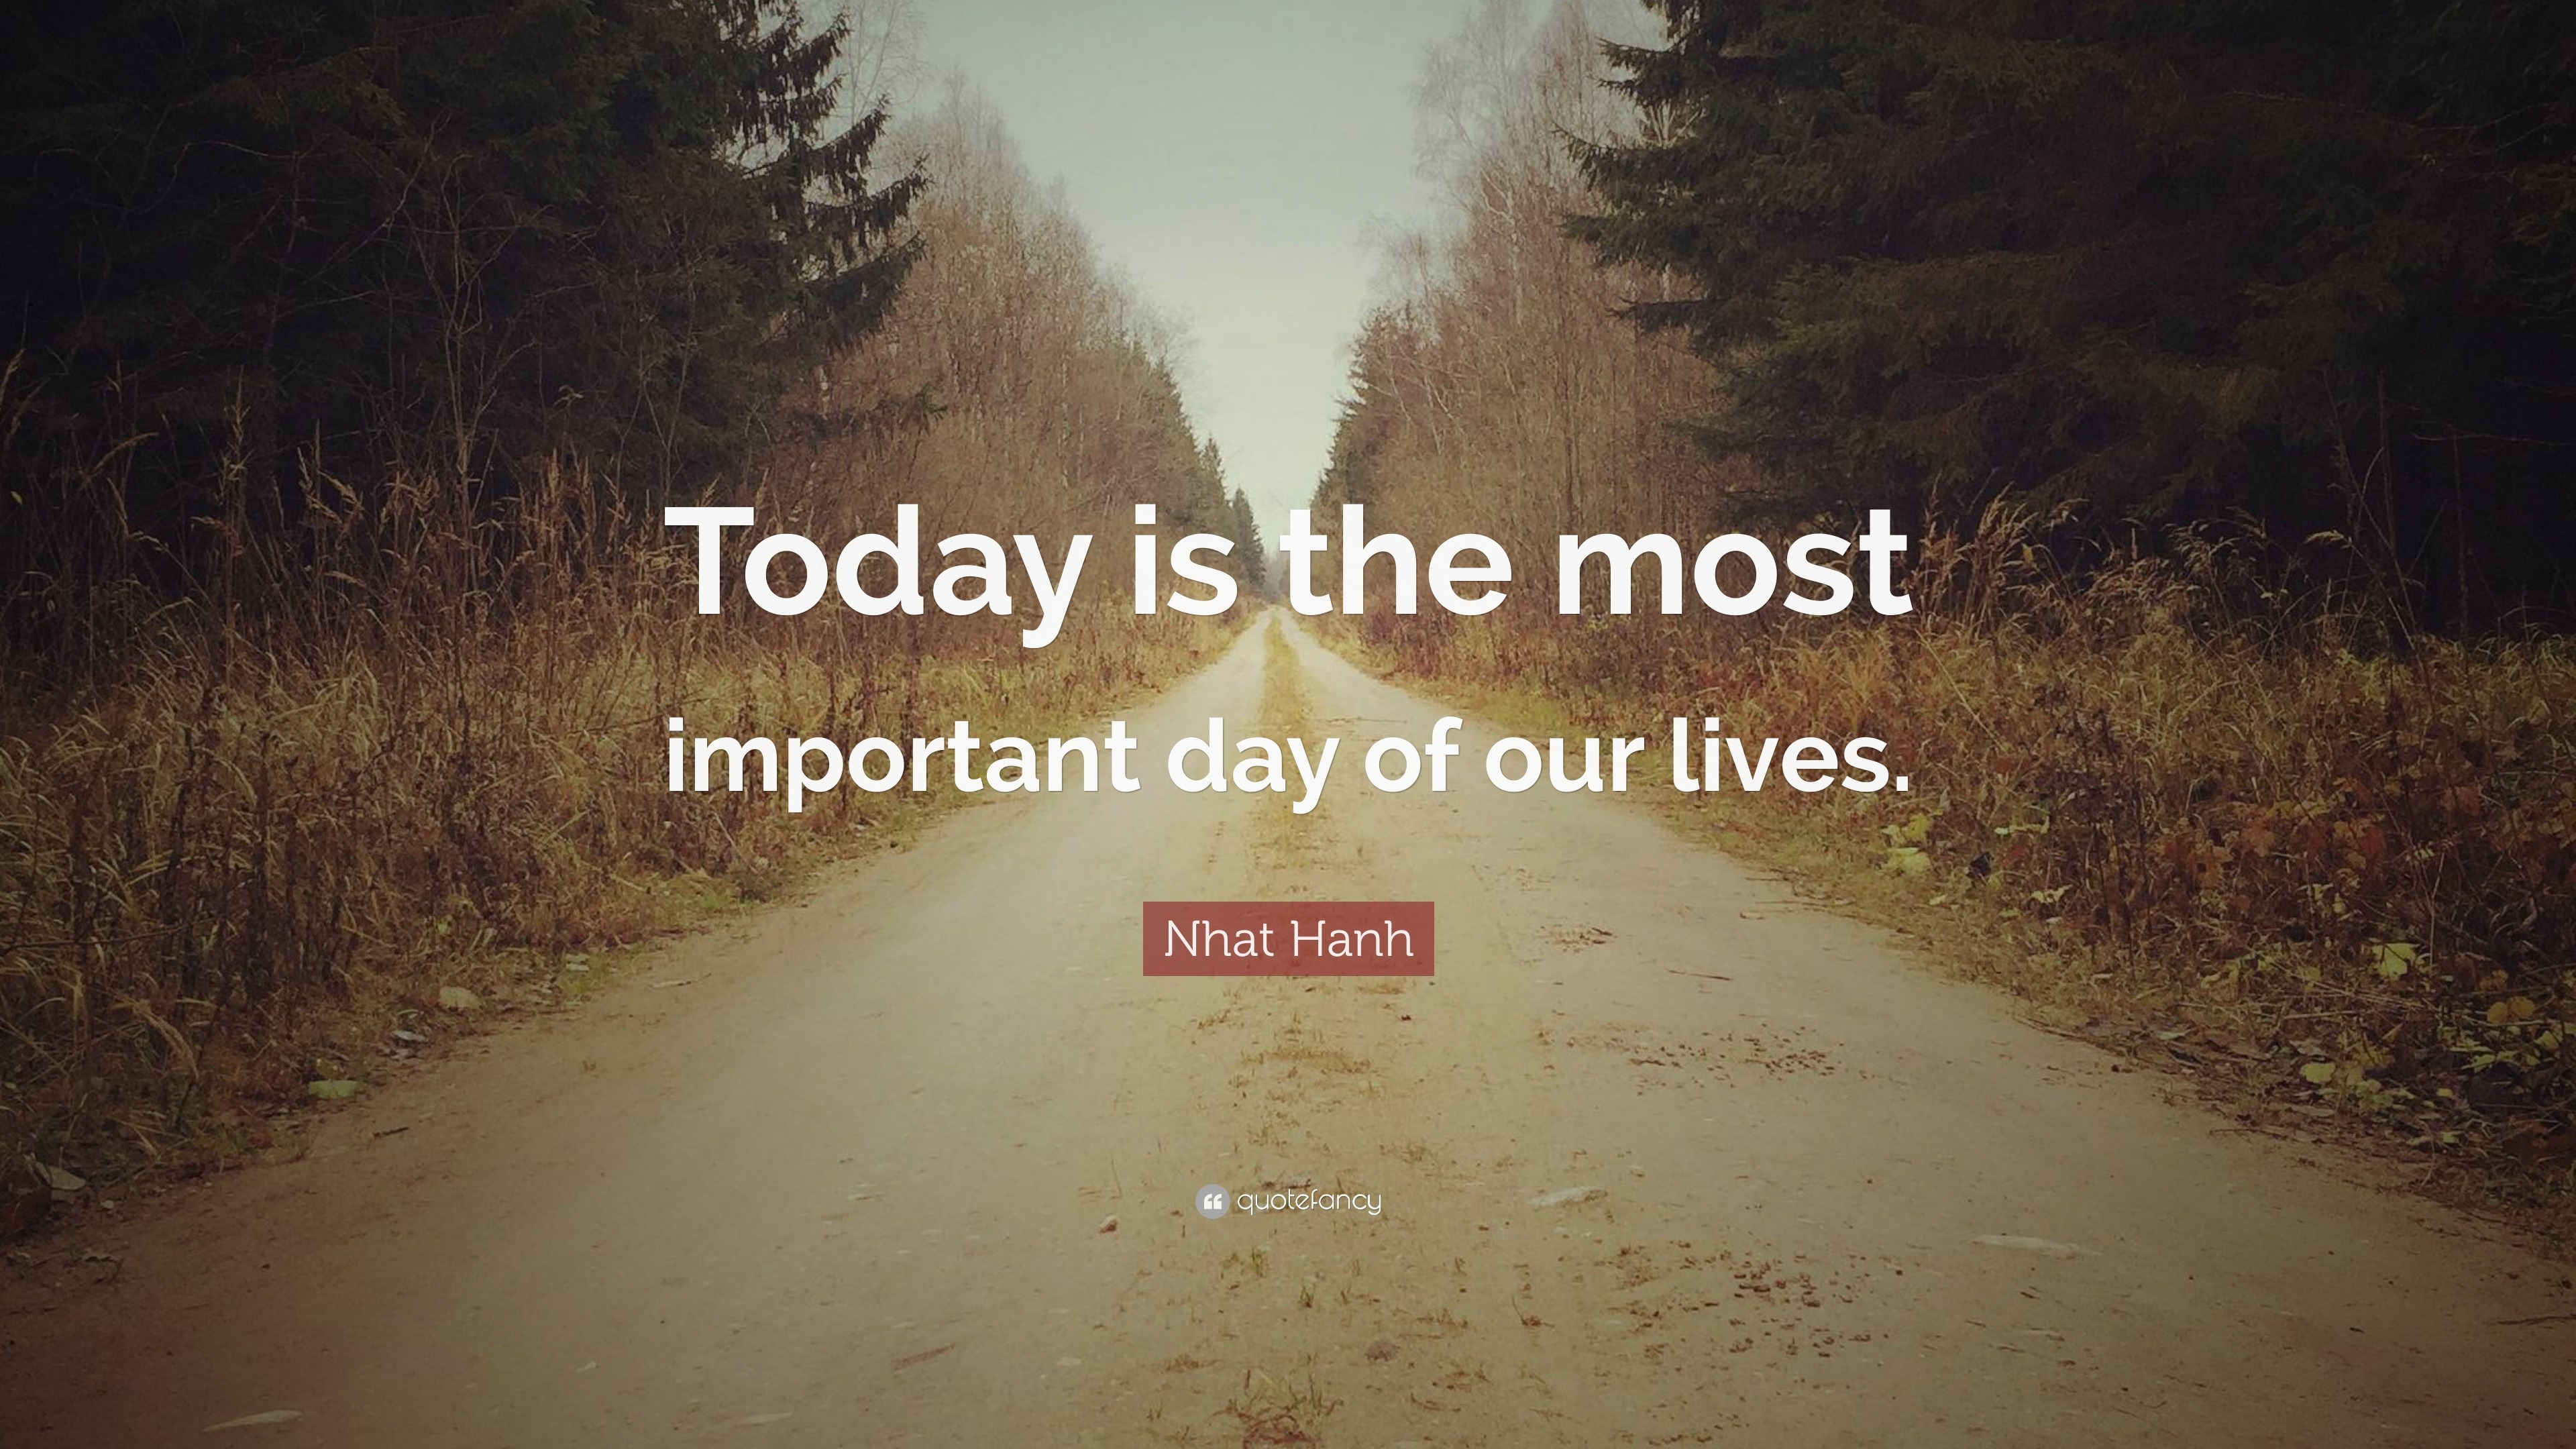 Nhat Hanh Quote “Today is the most important day of our lives.”